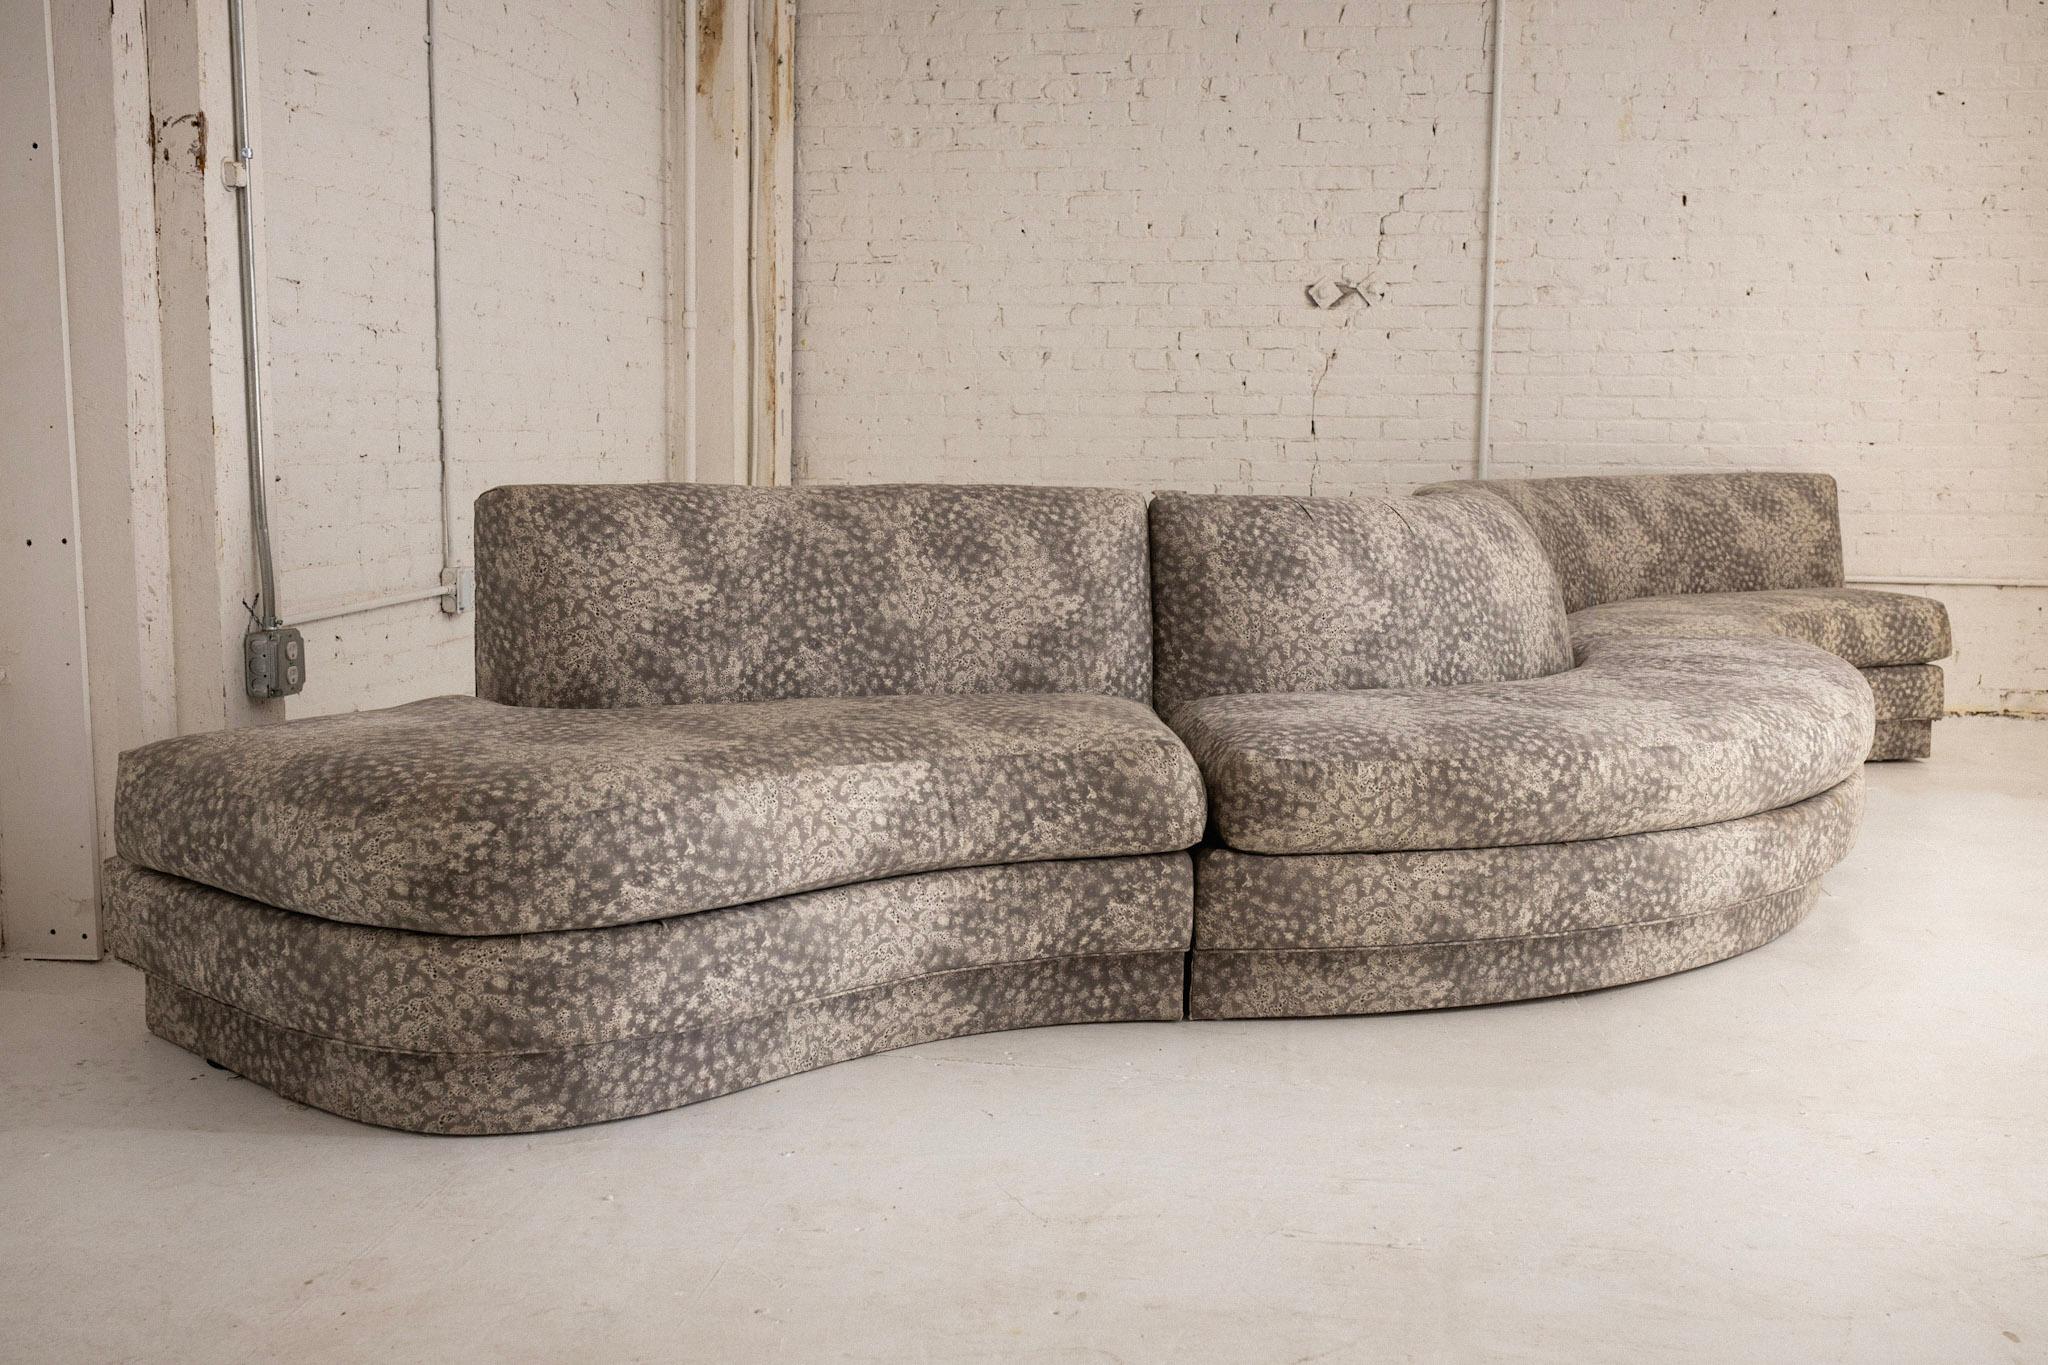 A 3 piece Postmodern serpentine sectional manufactured by Royal Lounge Co. Original graphic print cotton upholstery. Reupholstery recommended. Three pieces can be arranged at your discretion to alter the shape of the sofa. Retains original